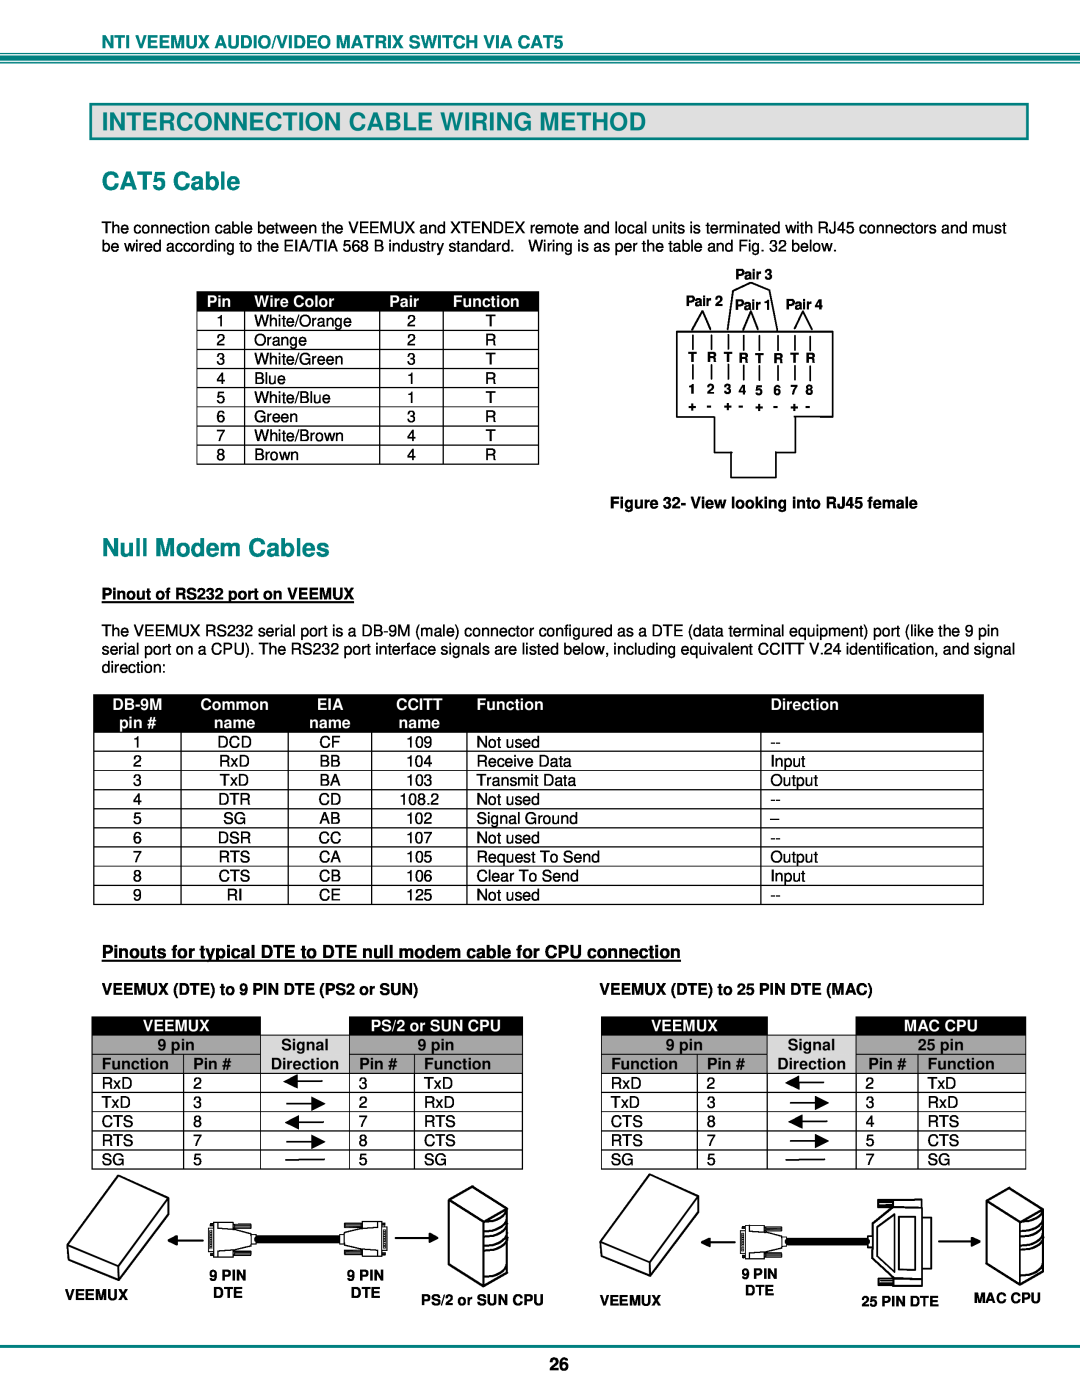 Network Technologies SM-nXm-C5AV-LCD INTERCONNECTION CABLE WIRING METHOD CAT5 Cable, Null Modem Cables, 9 pin, Signal 